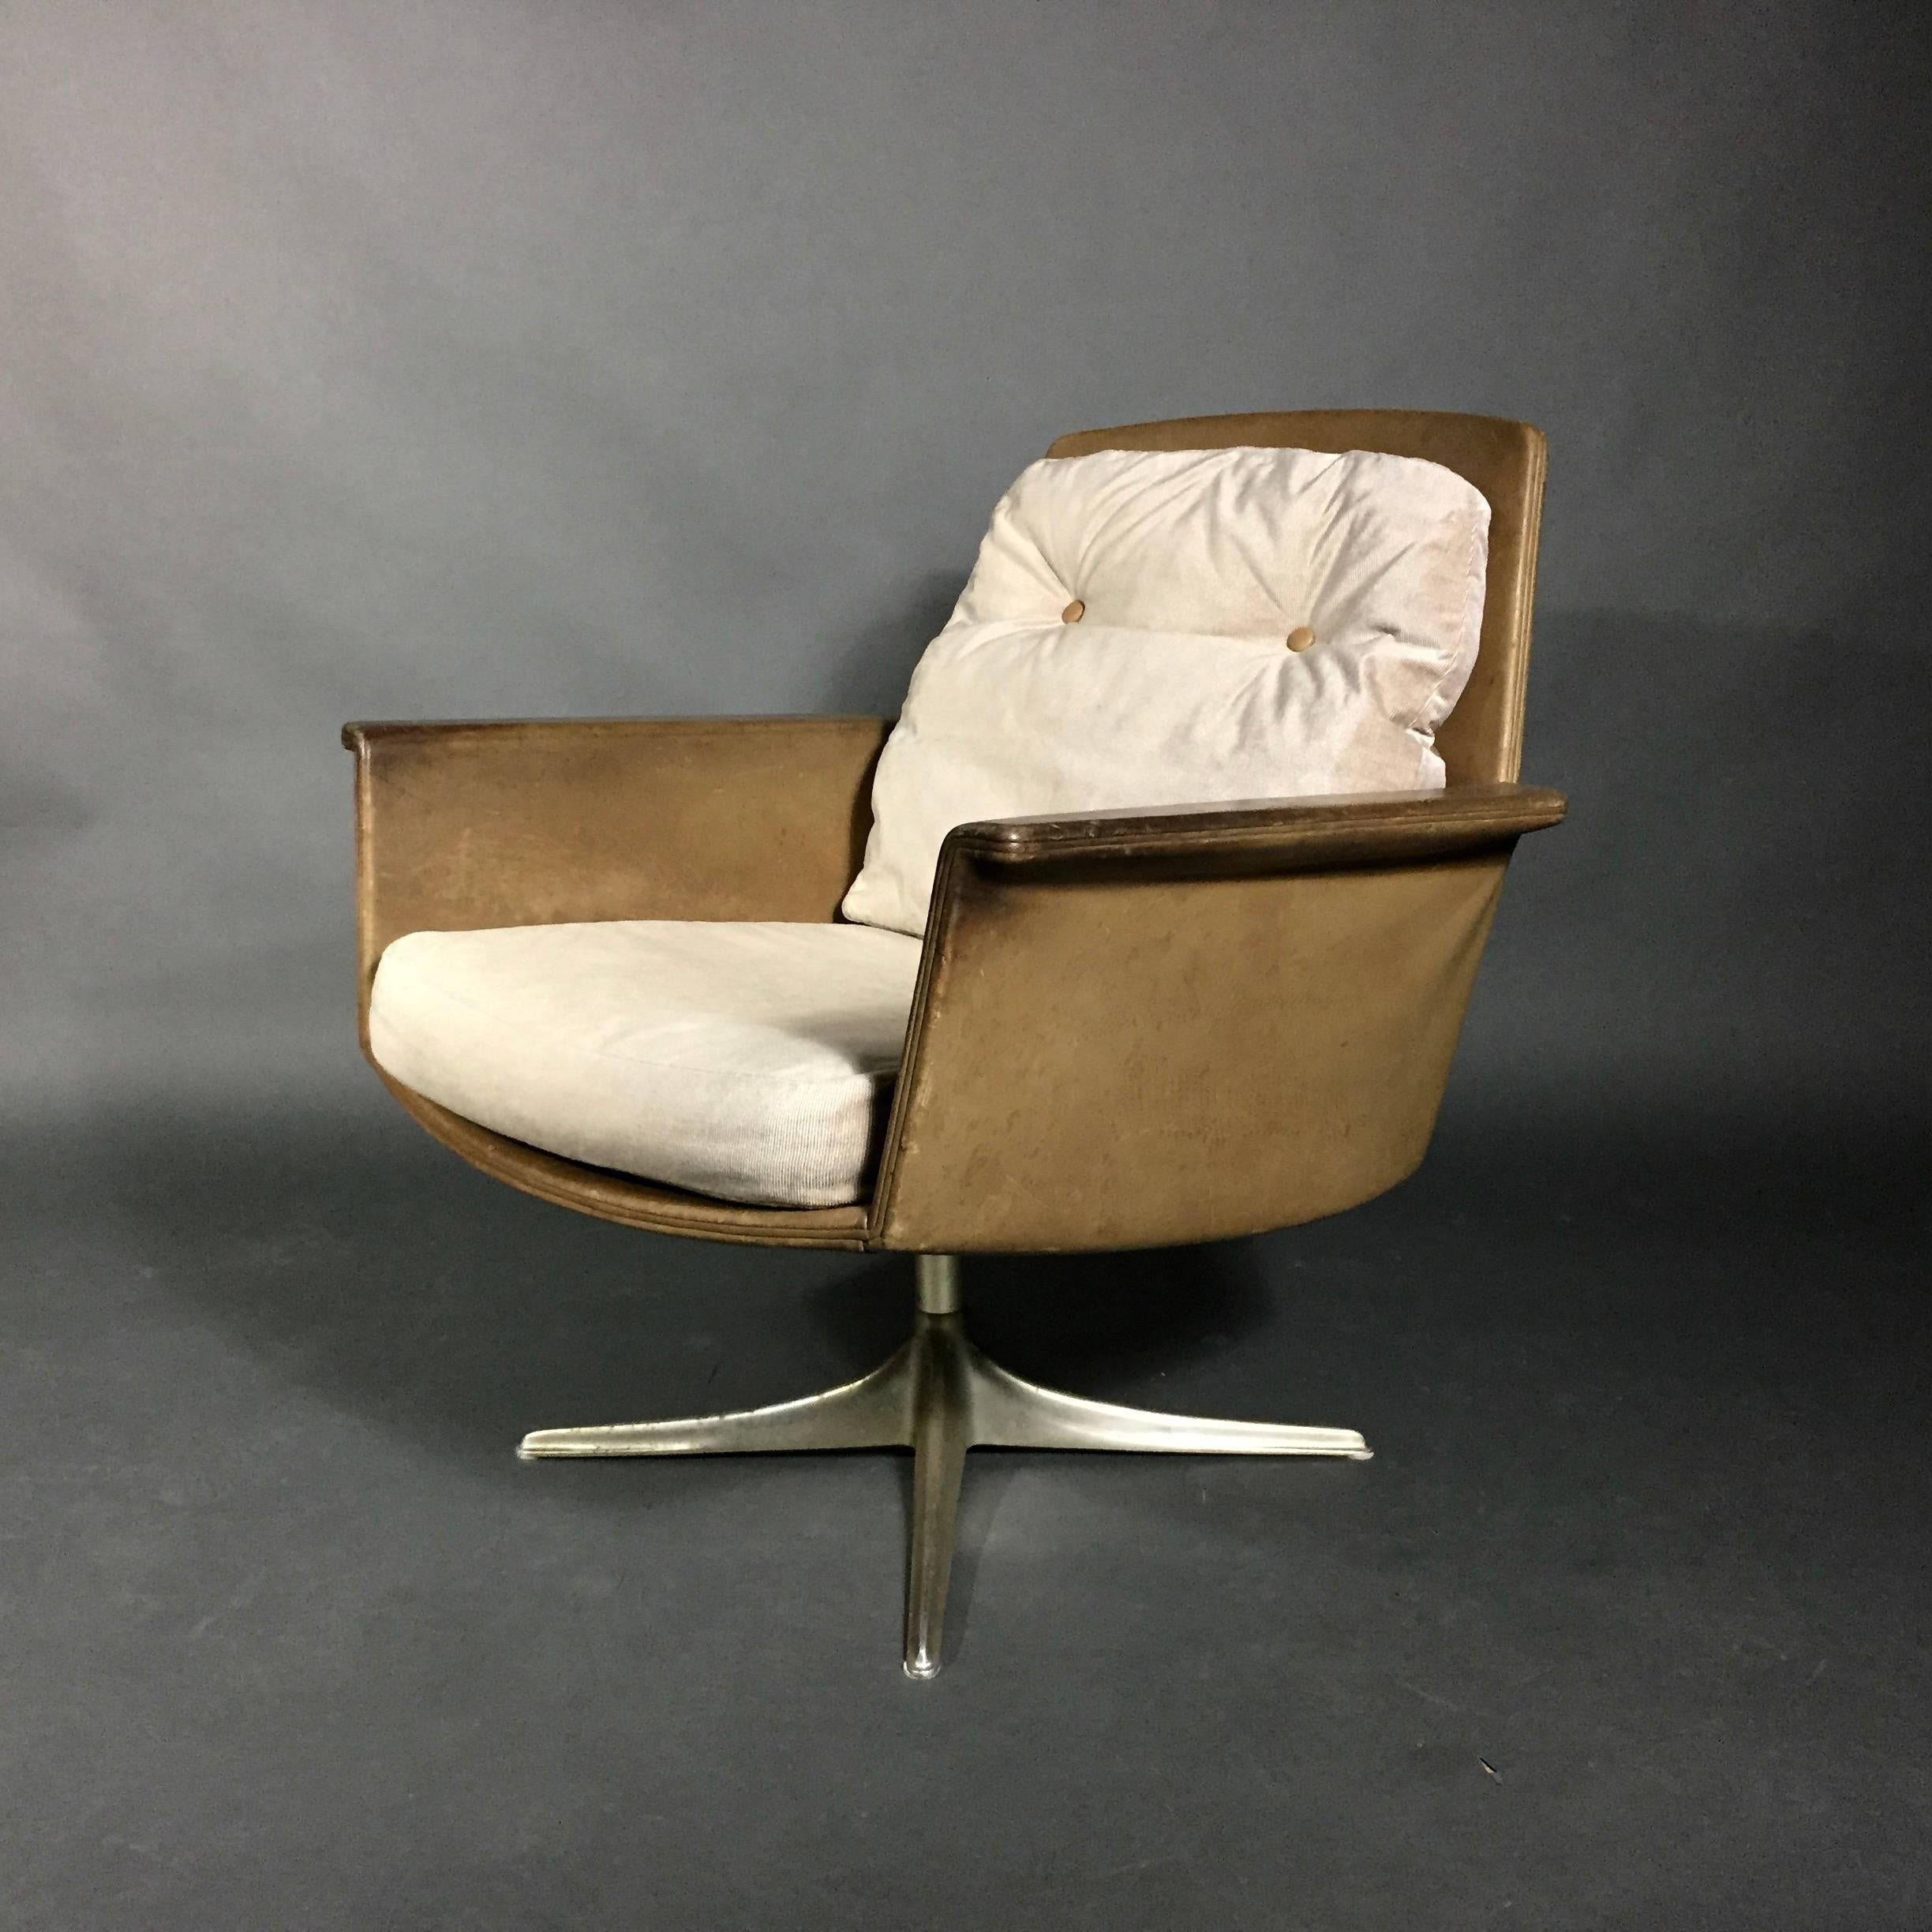 Horst Brüning, an influential German architect and industrial designer who was known for his award winning furniture designs for Alfred Kill of Kill International. Th Sedia line of pieces was designed in the 1960 and manufactured by COR Germany.